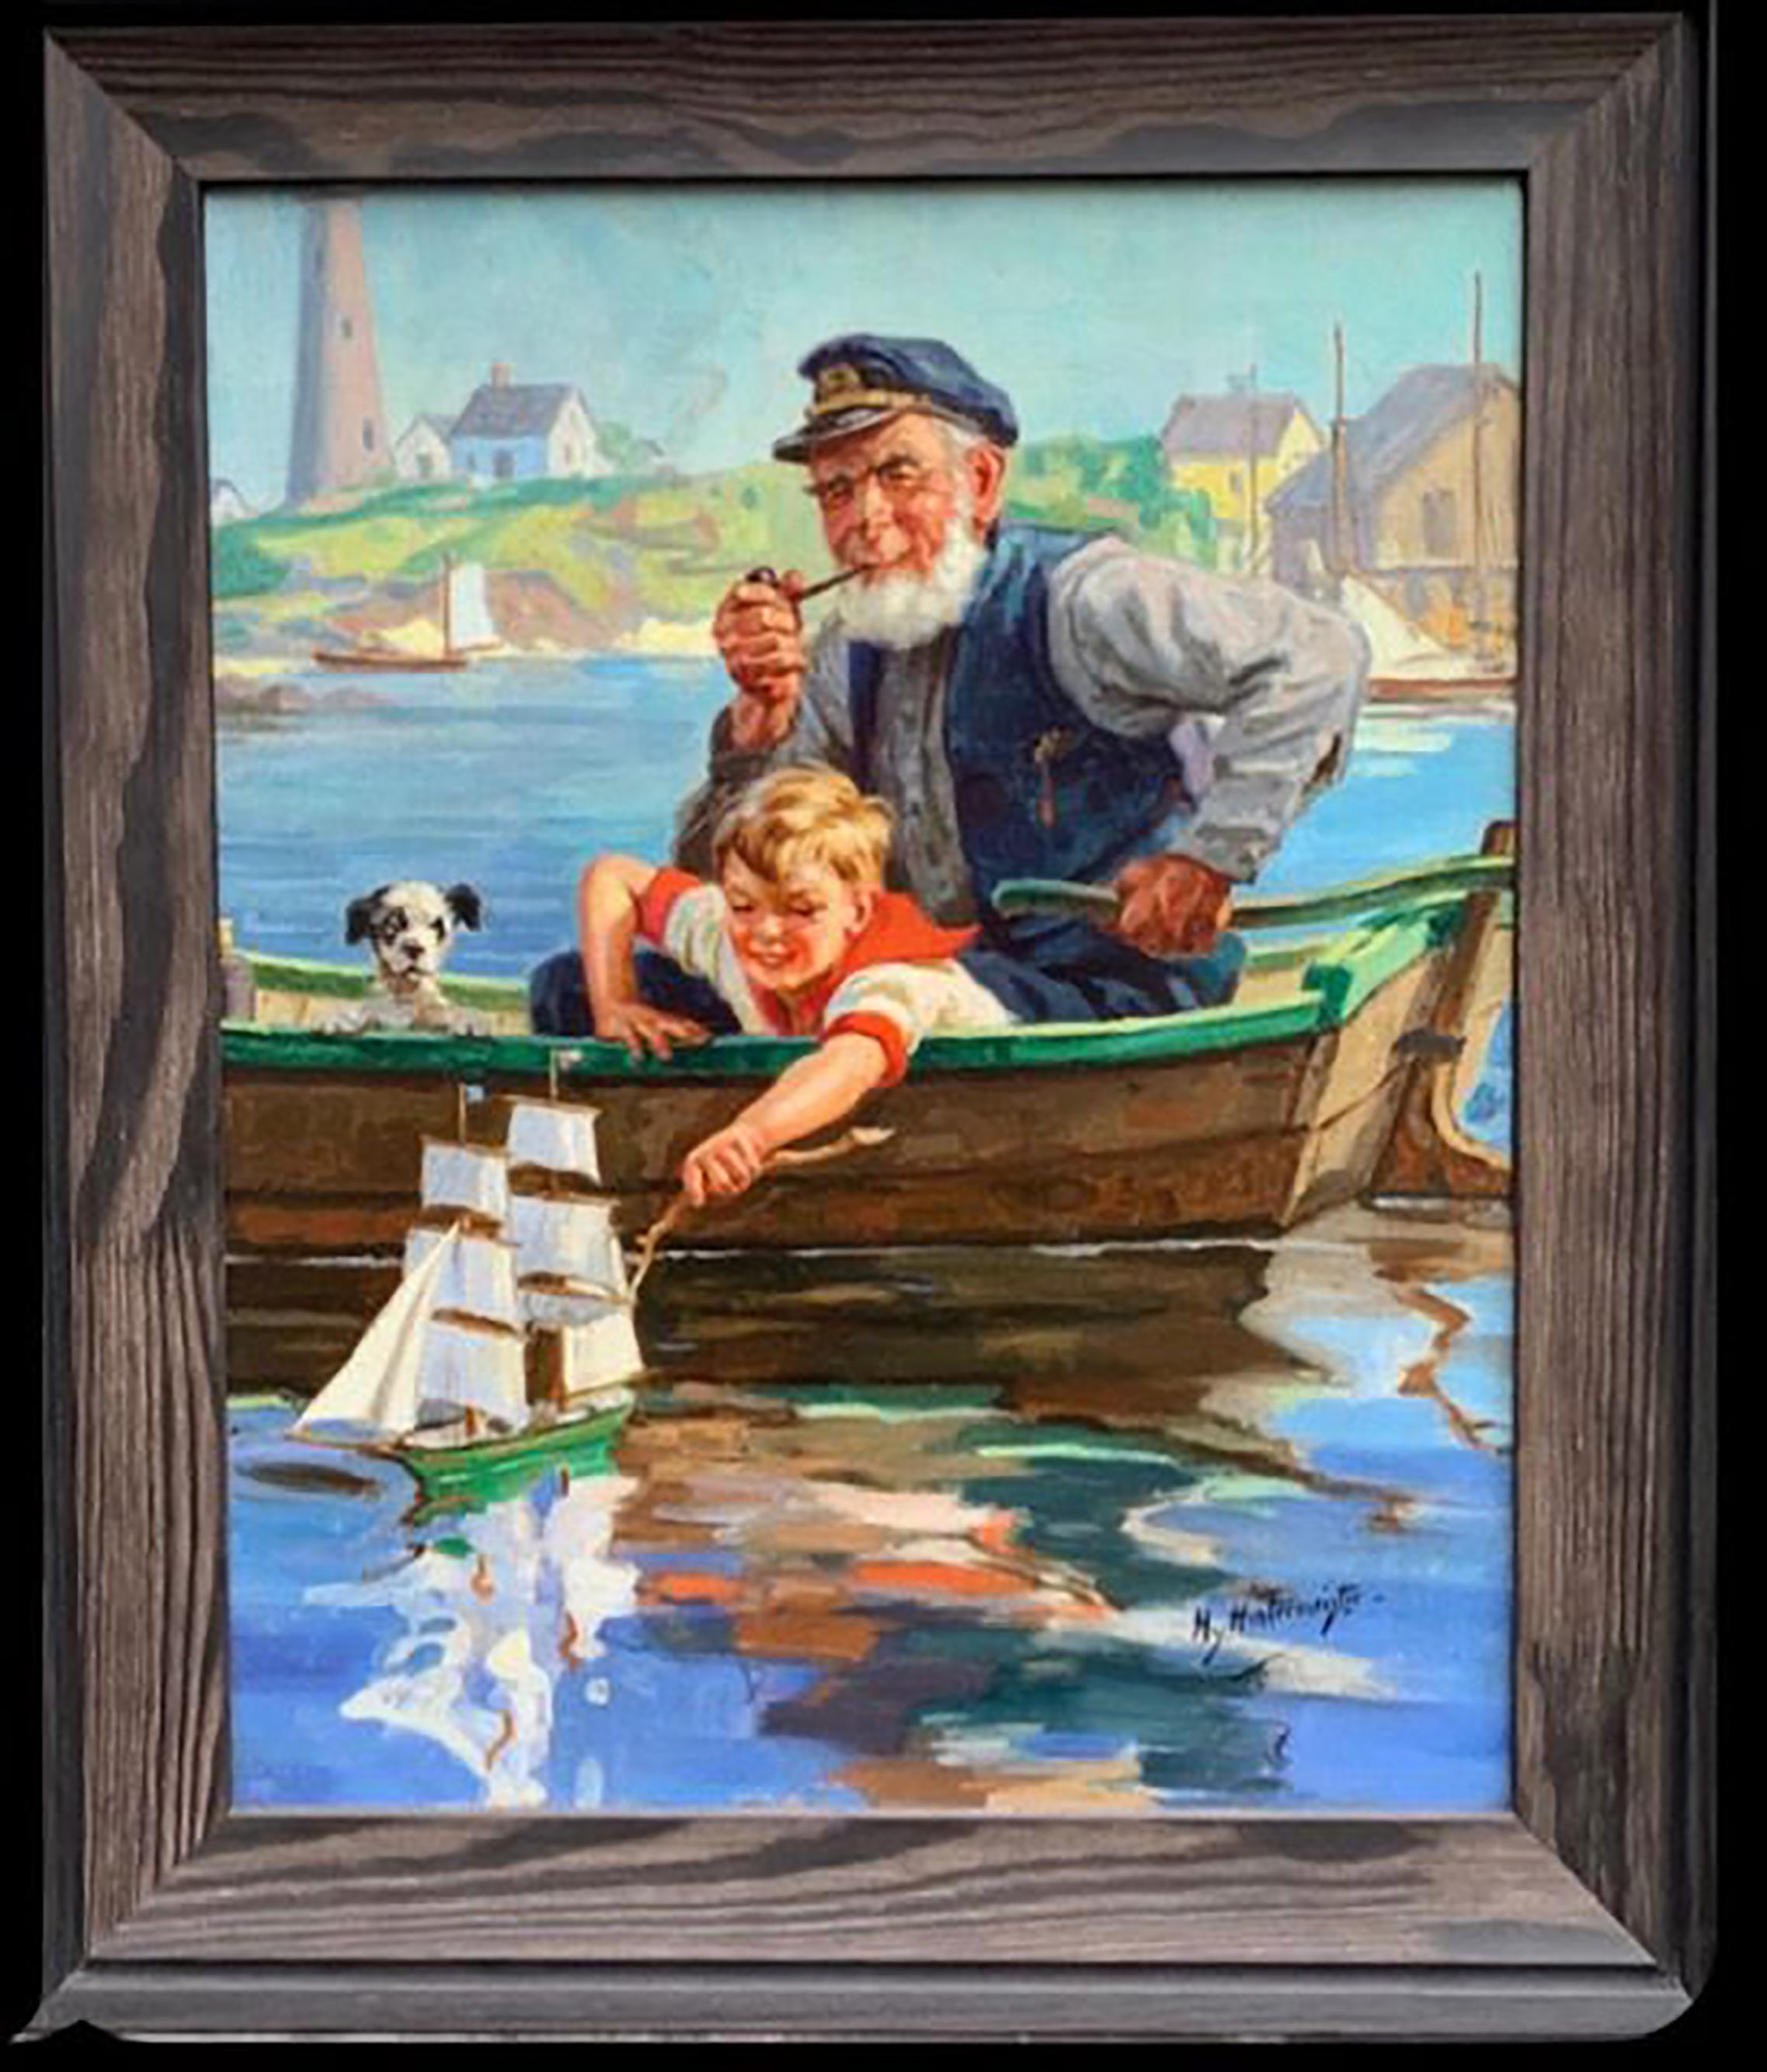 Man and Boy on Boat with Dog - Painting by Henry Hintermeister